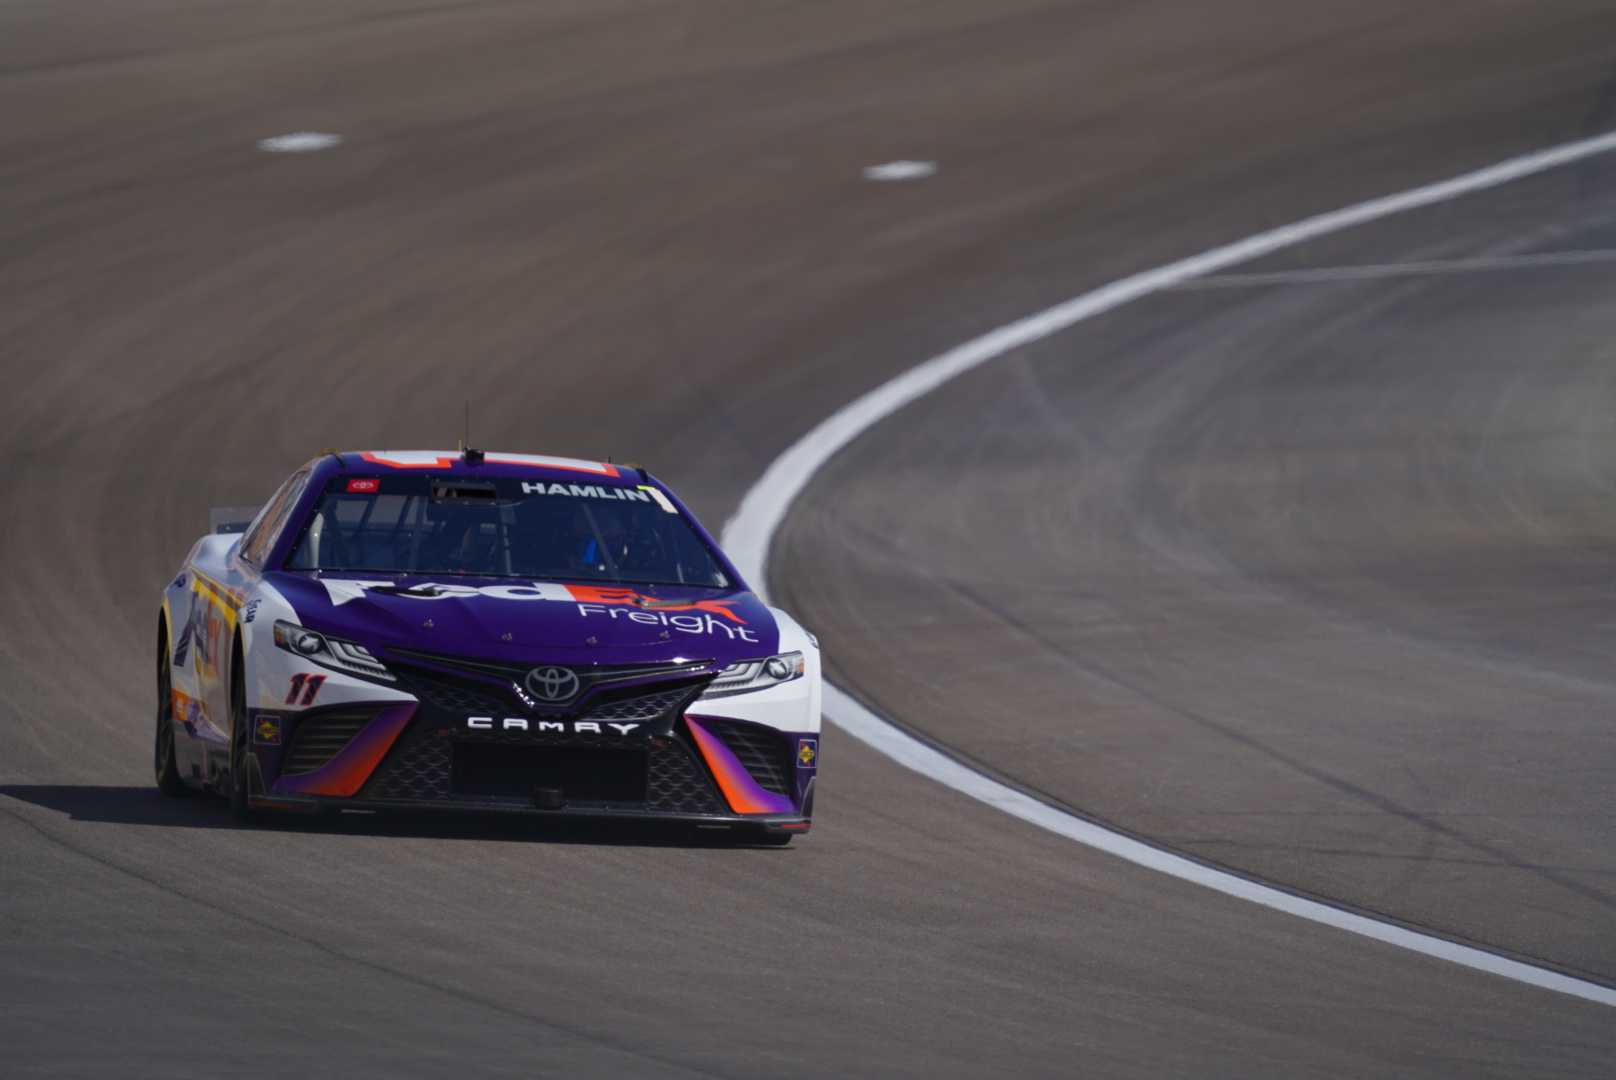 Will Denny Hamlin snap out of his tough start? (Photo: Jordan Anders-McClain | The Podium Finish)